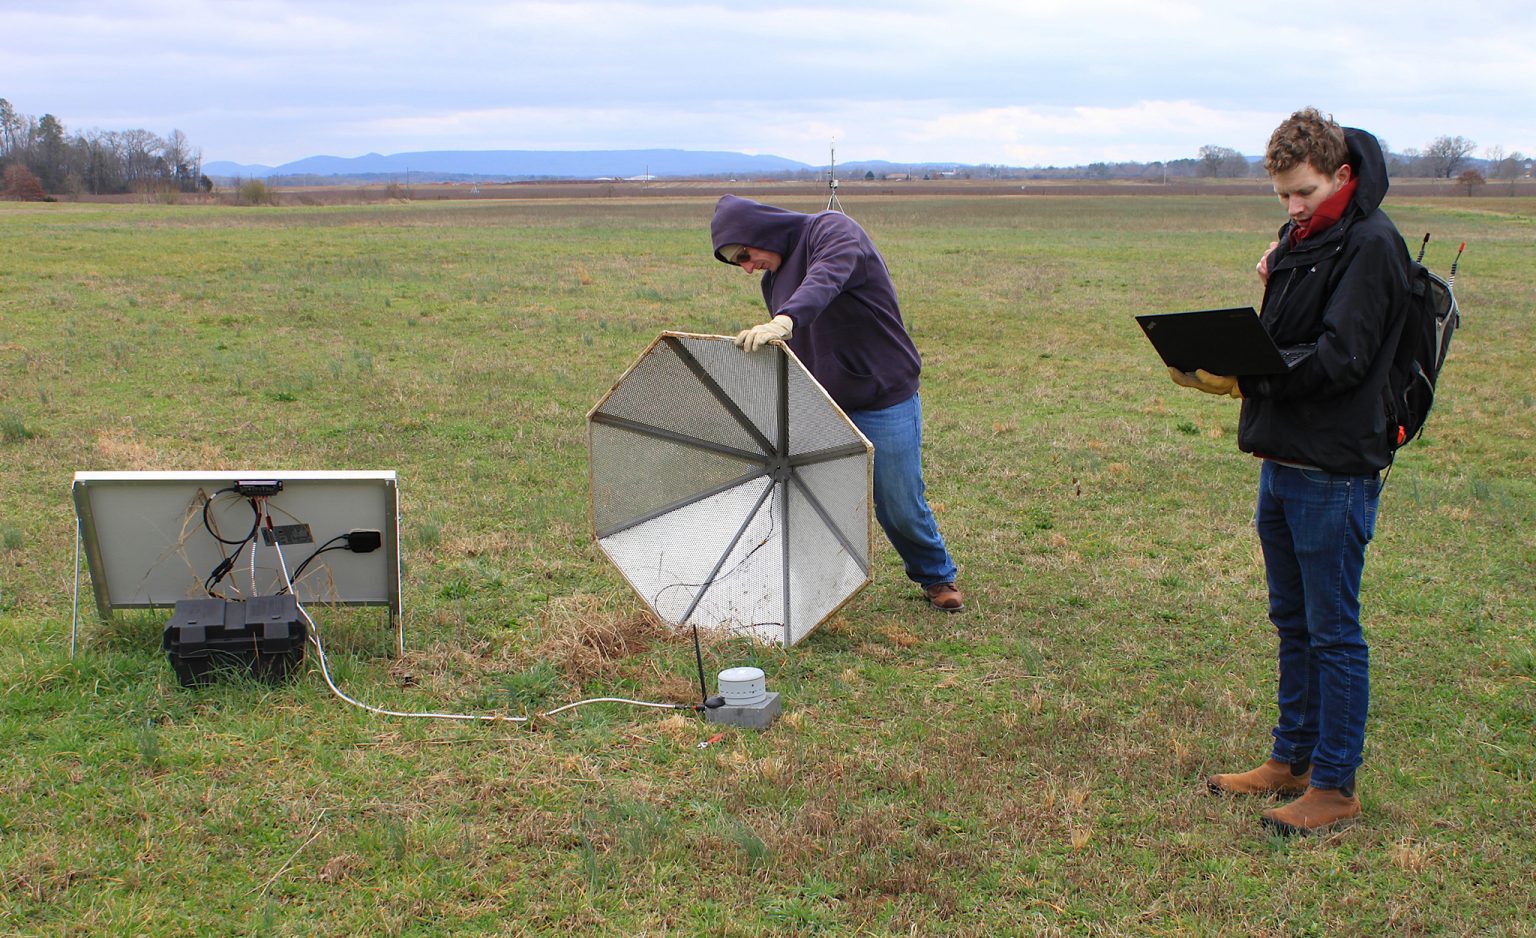 Brian Carpenter (left) and Hank Buchanan, two research and development engineers at the University of Mississippi’s National Center for Physical Acoustics, work on an infrasound array sensor at Alabama A&M University’s Winifred Thomas Agricultural Research Station north of Huntsville in 2020. Photo by Shea Stewart/UM Office of Research and Sponsored Programs